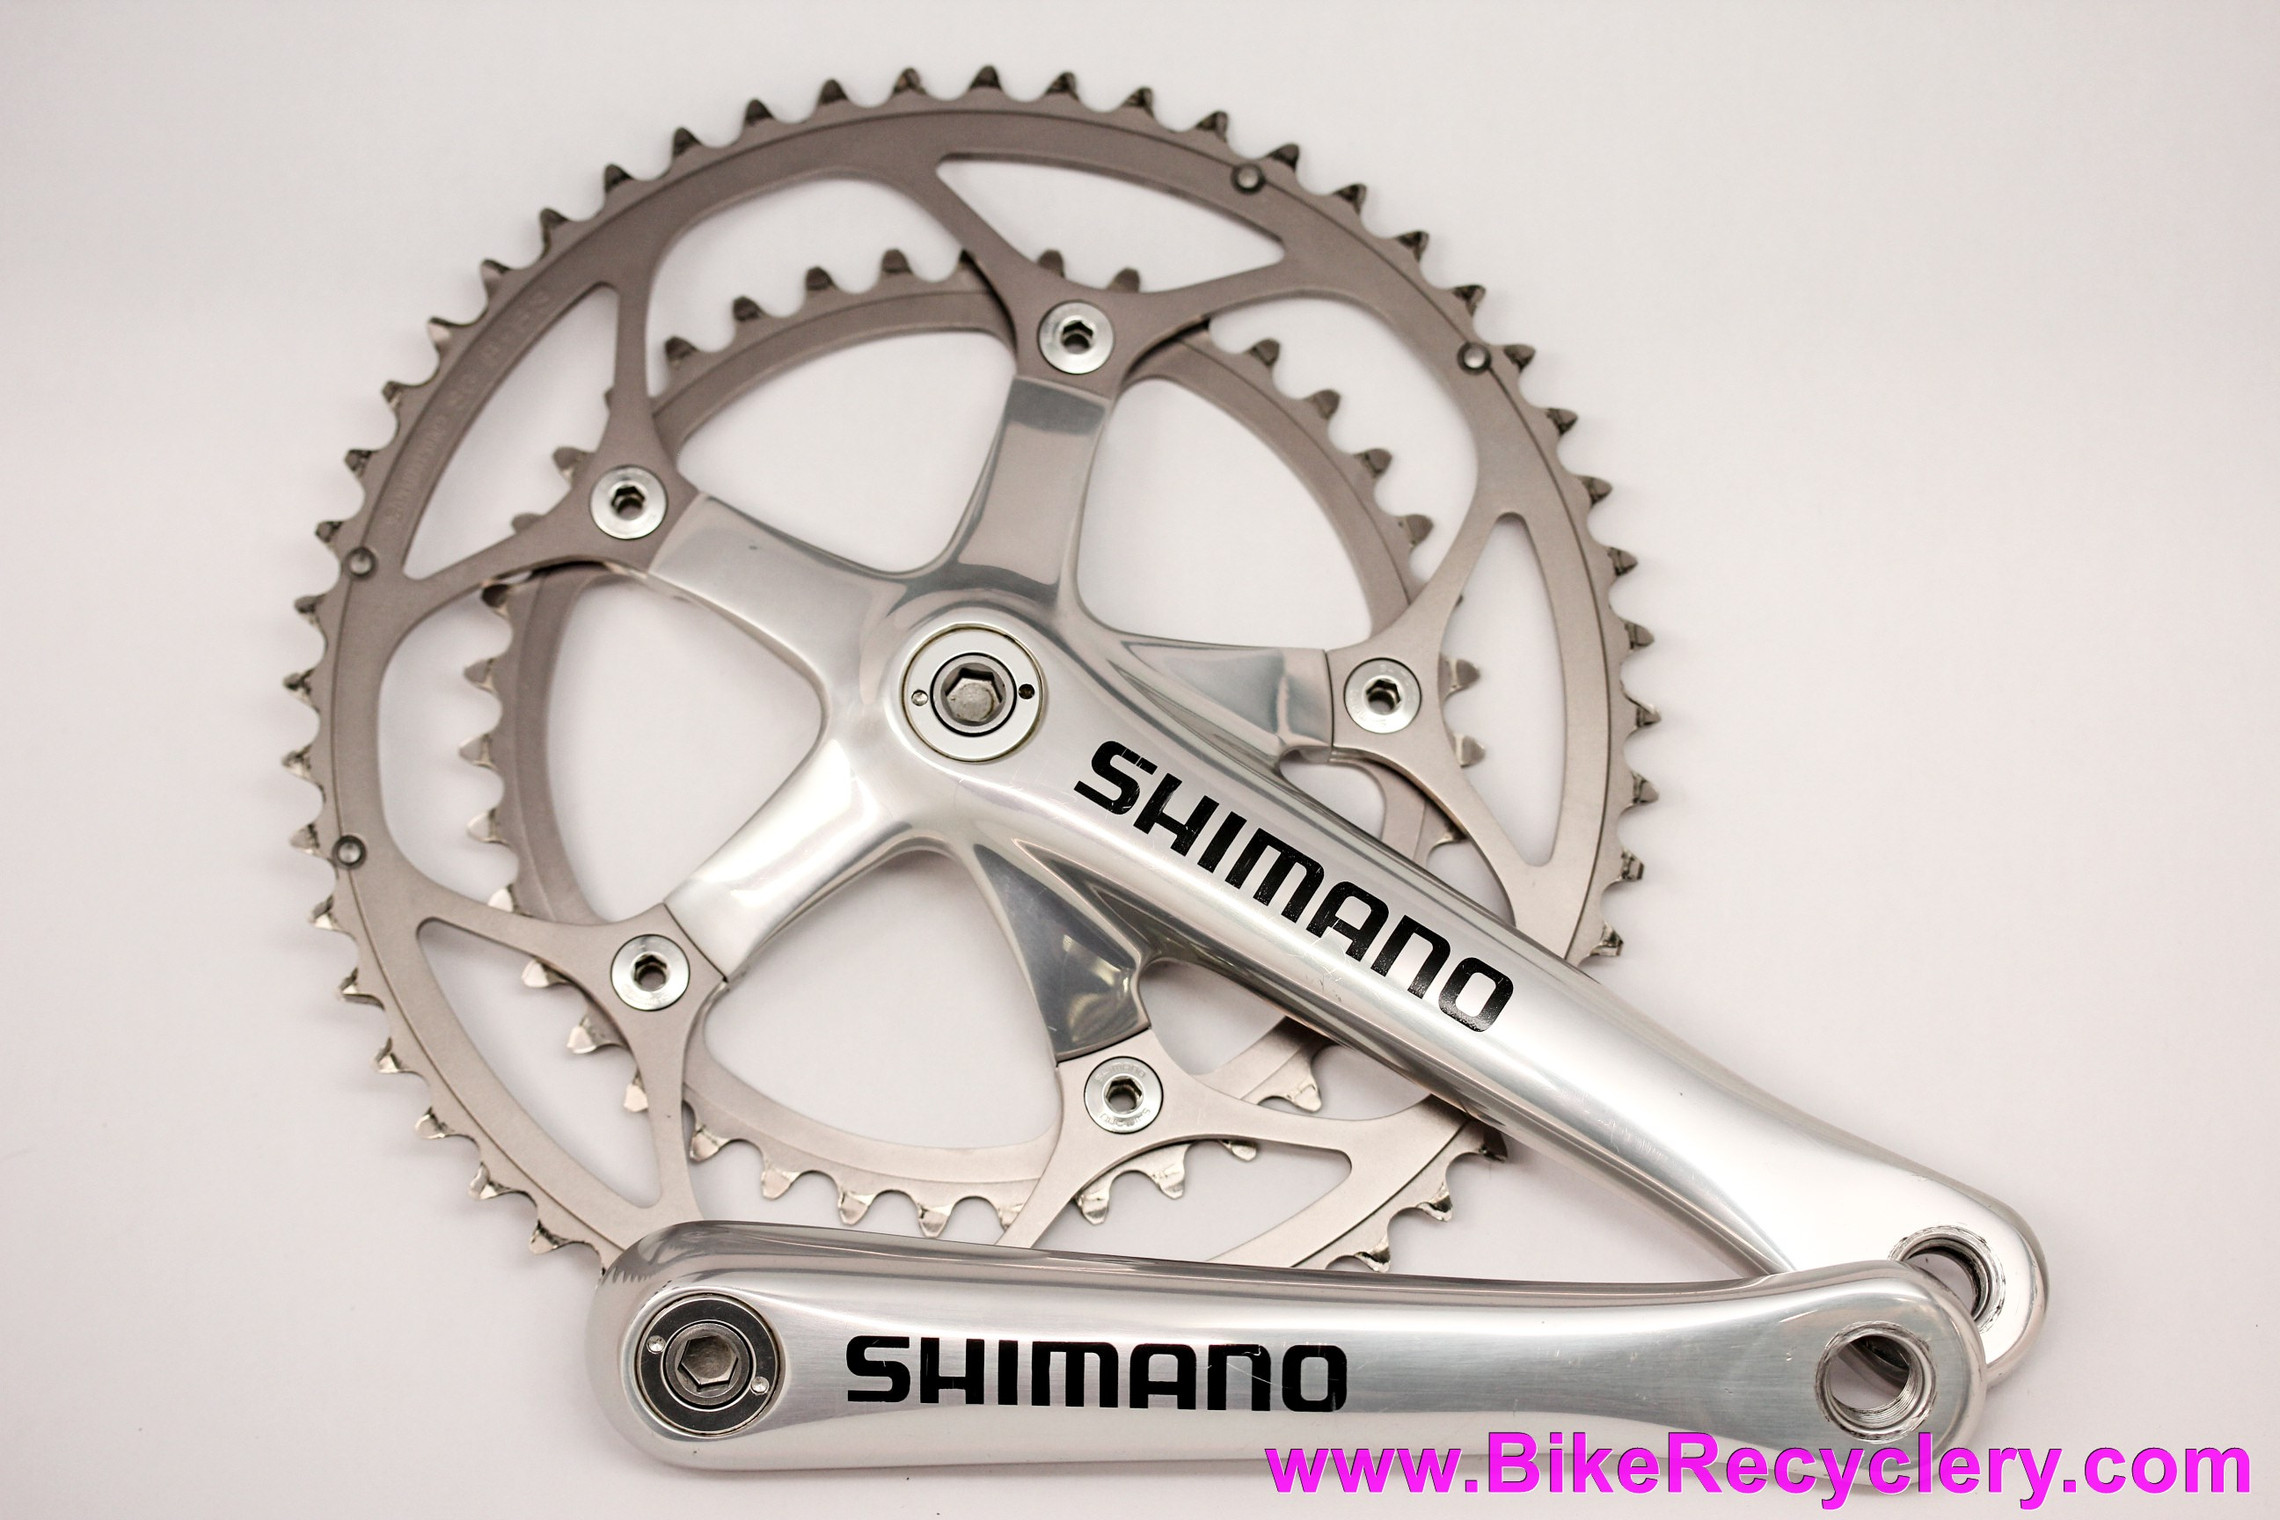 Shimano Dura Ace FC-7701 Team Issue Crankset: 175mm x 53/39t Double (Almost NOS >50 Miles)